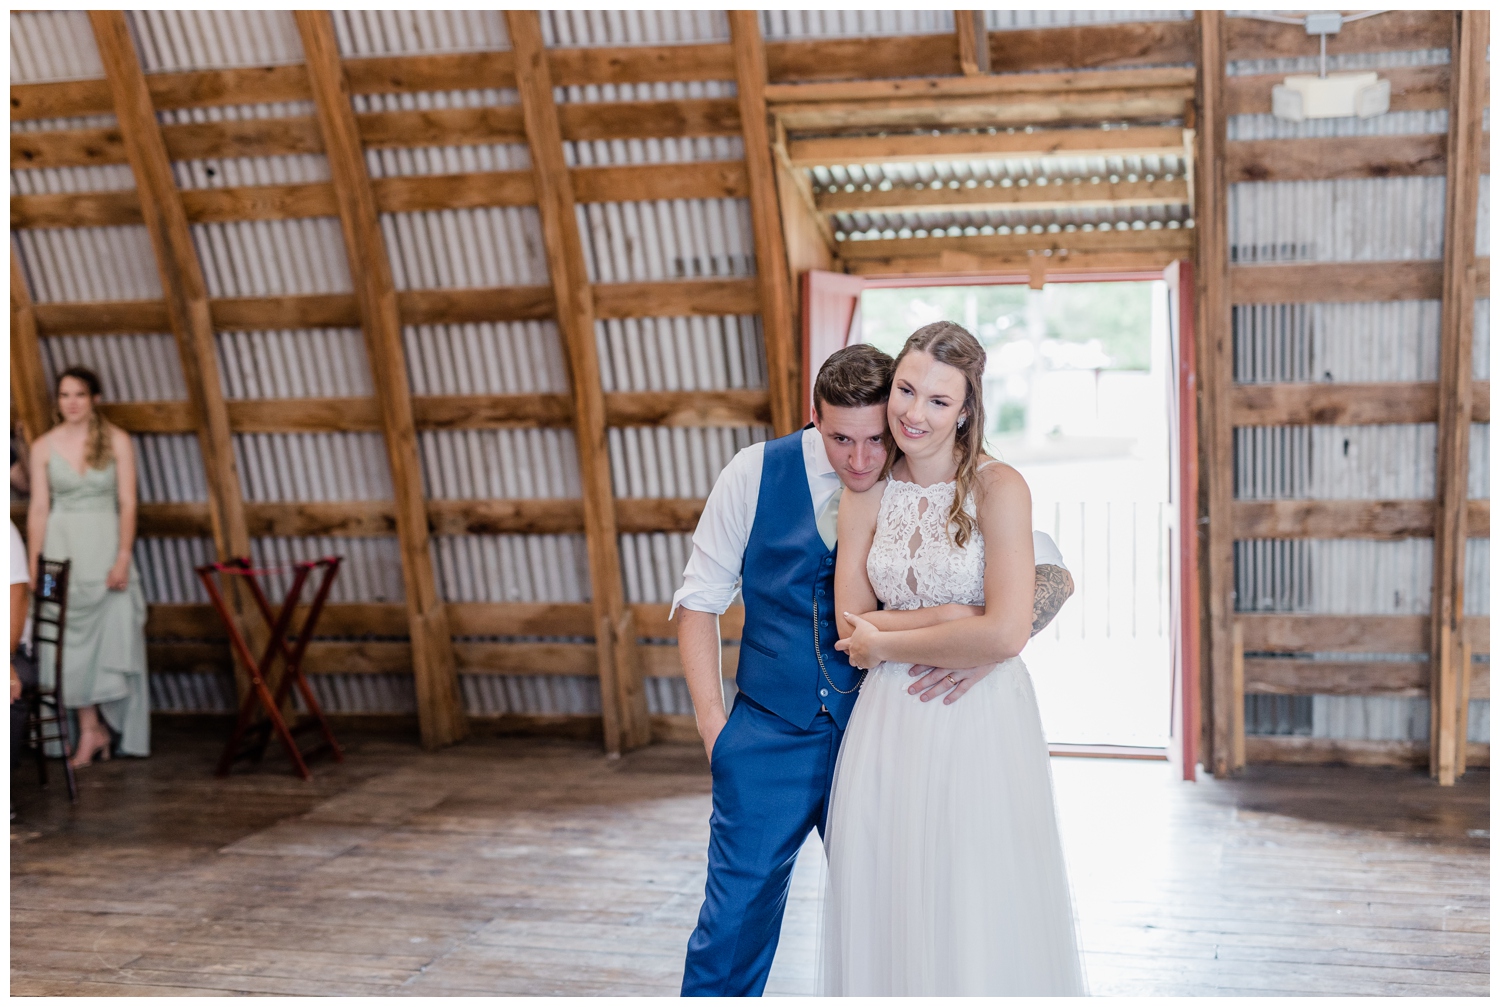 Bride and Groom snuggling up together during toasts and speeches at their barn wedding.